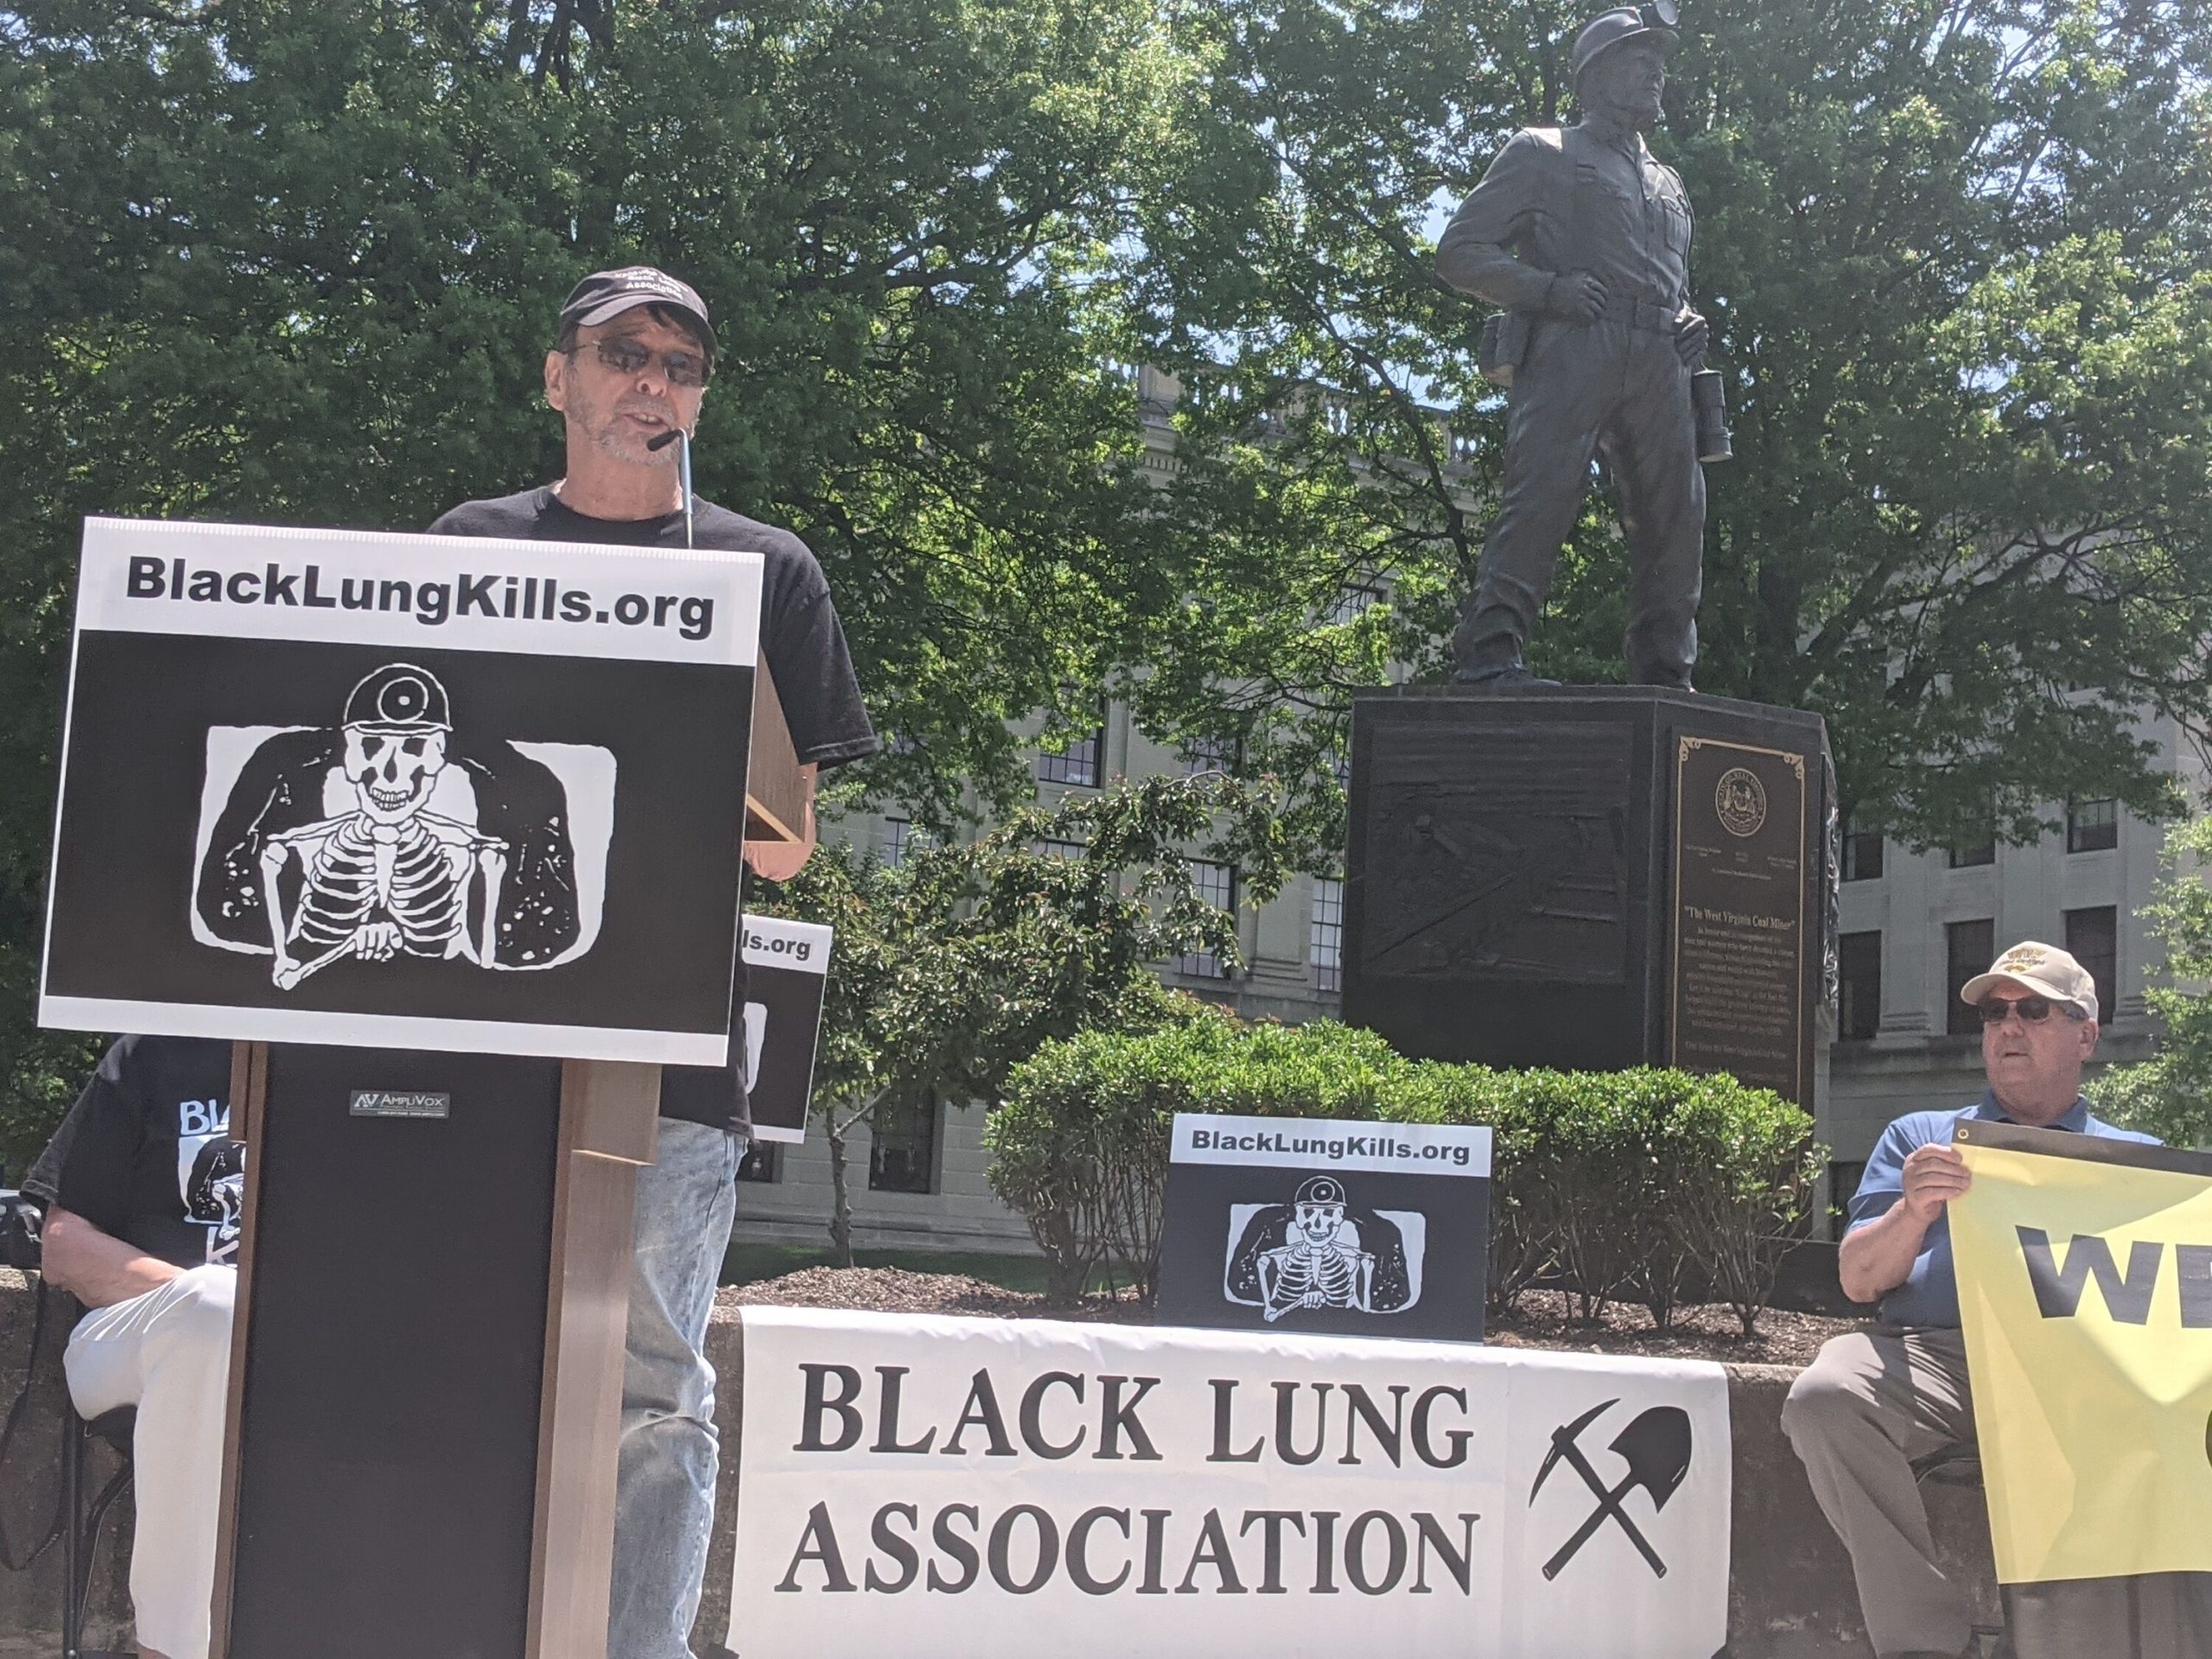 man stands at podium in front of statue of a miner, banner in background says "Black Lung Association"